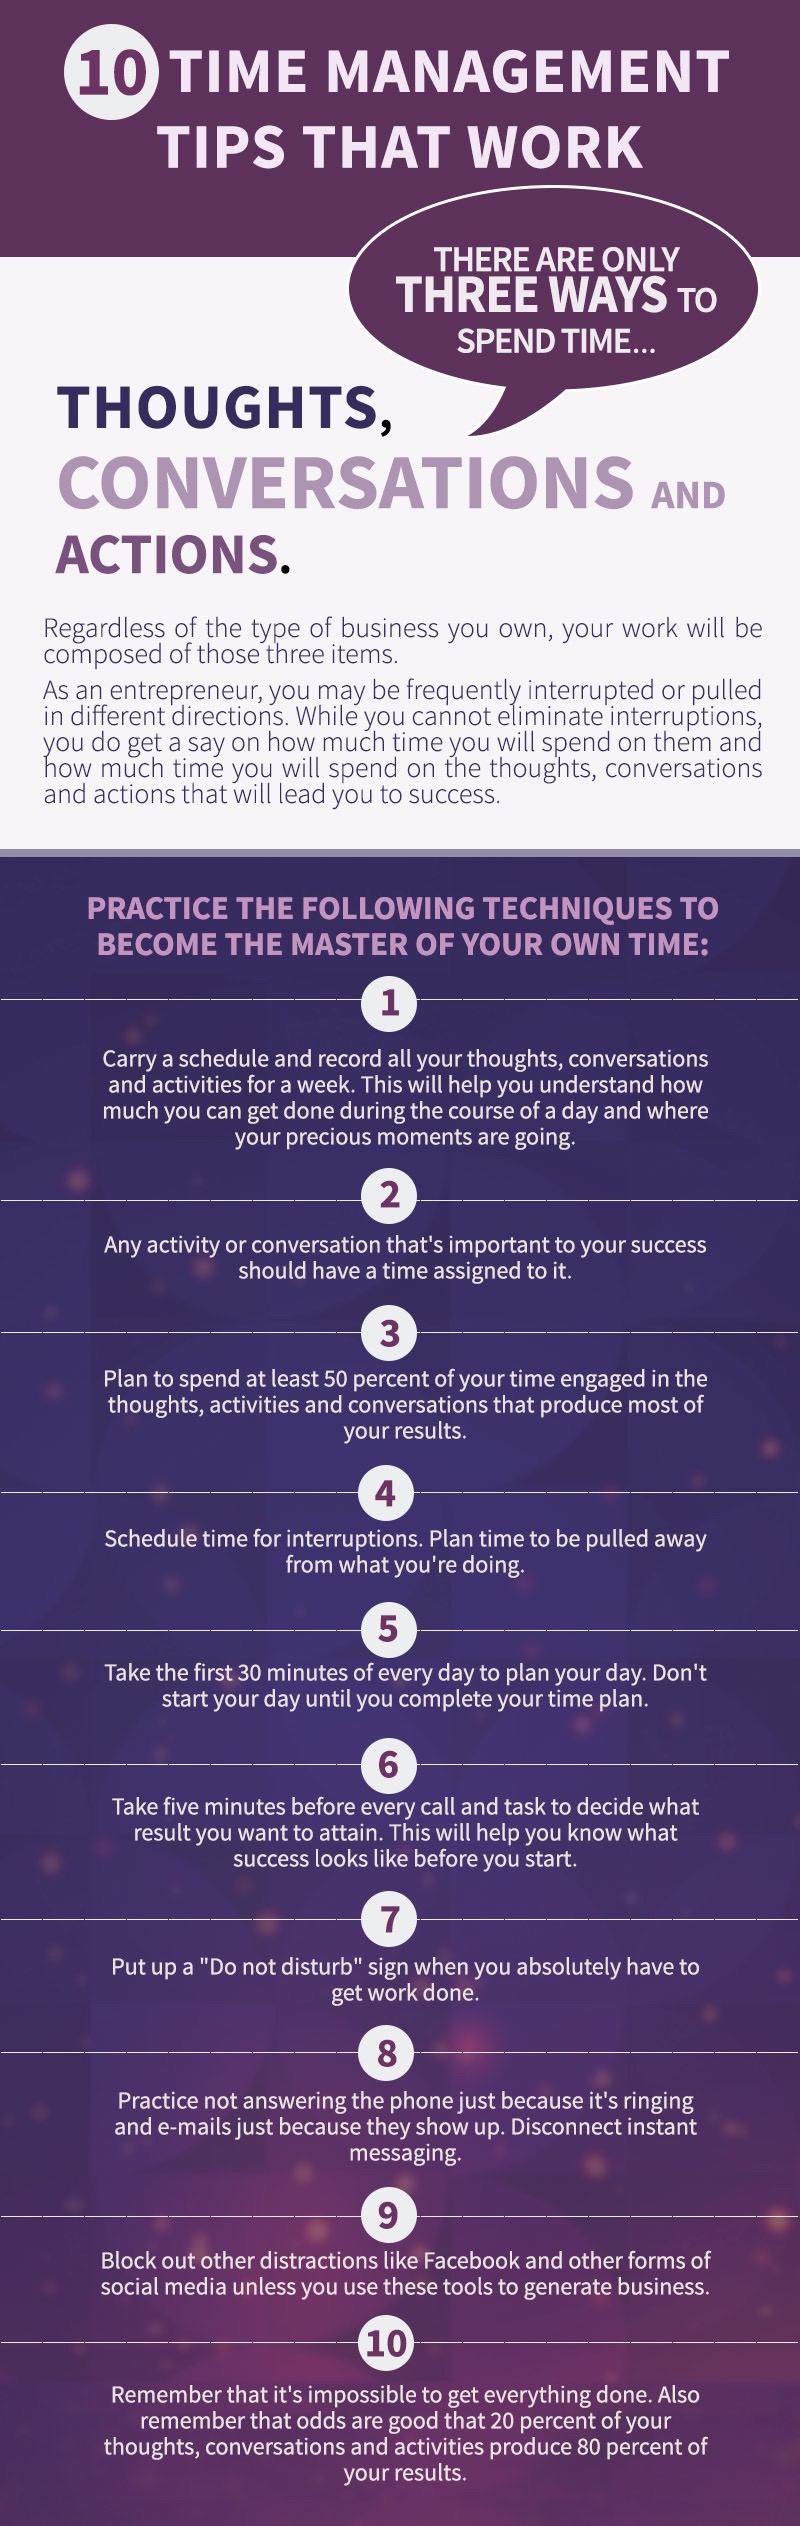 1413484001-10-time-management-tips-that-work-infographic (1)